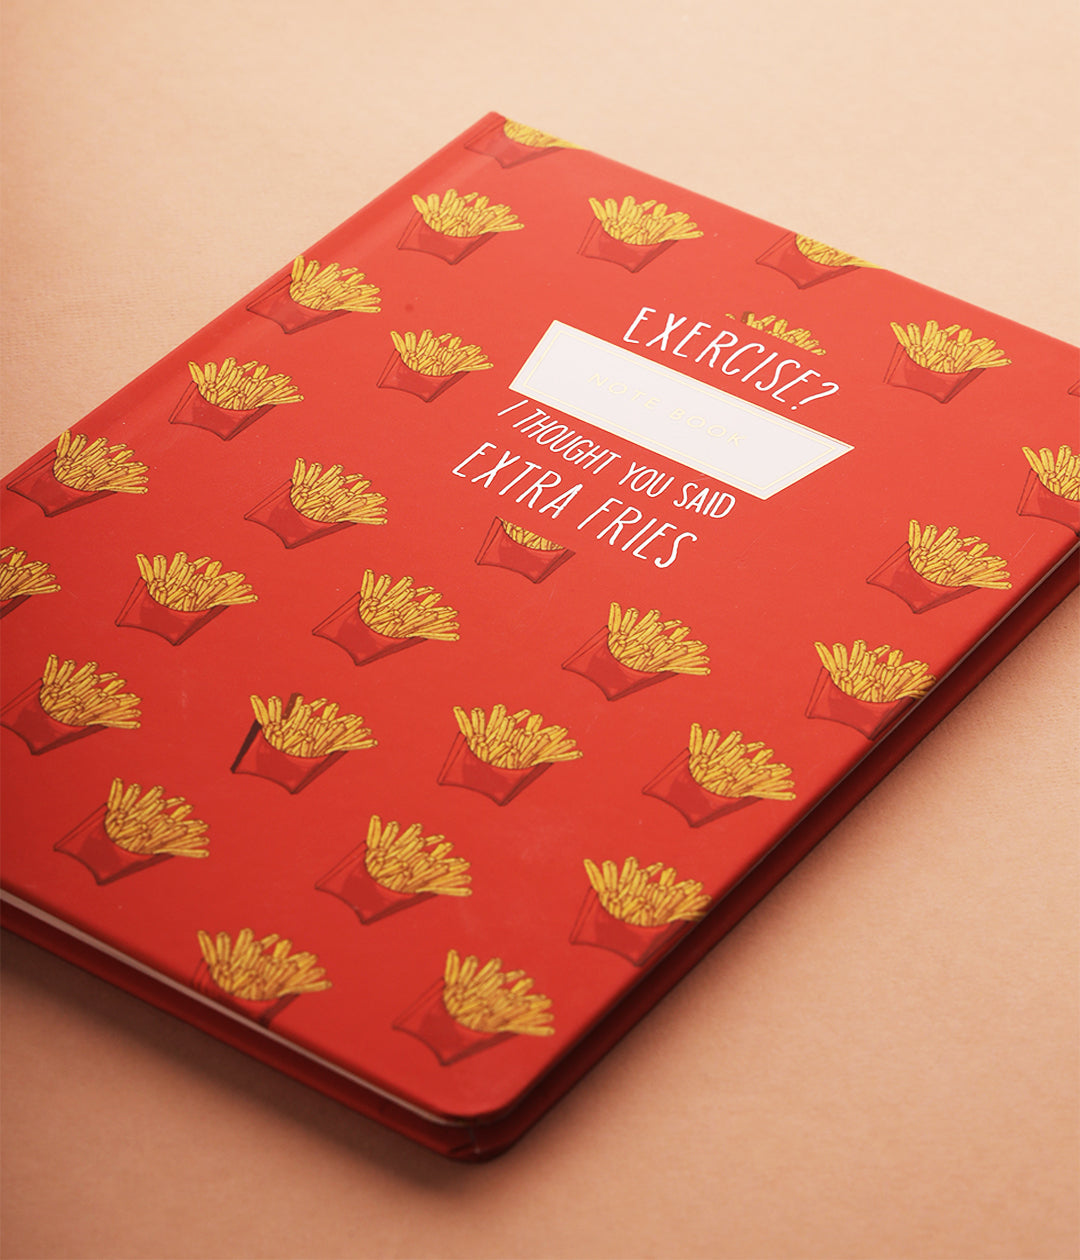 It's Fries-Day! Hardbound Notebook Journal Diary with Silver Foil Accents